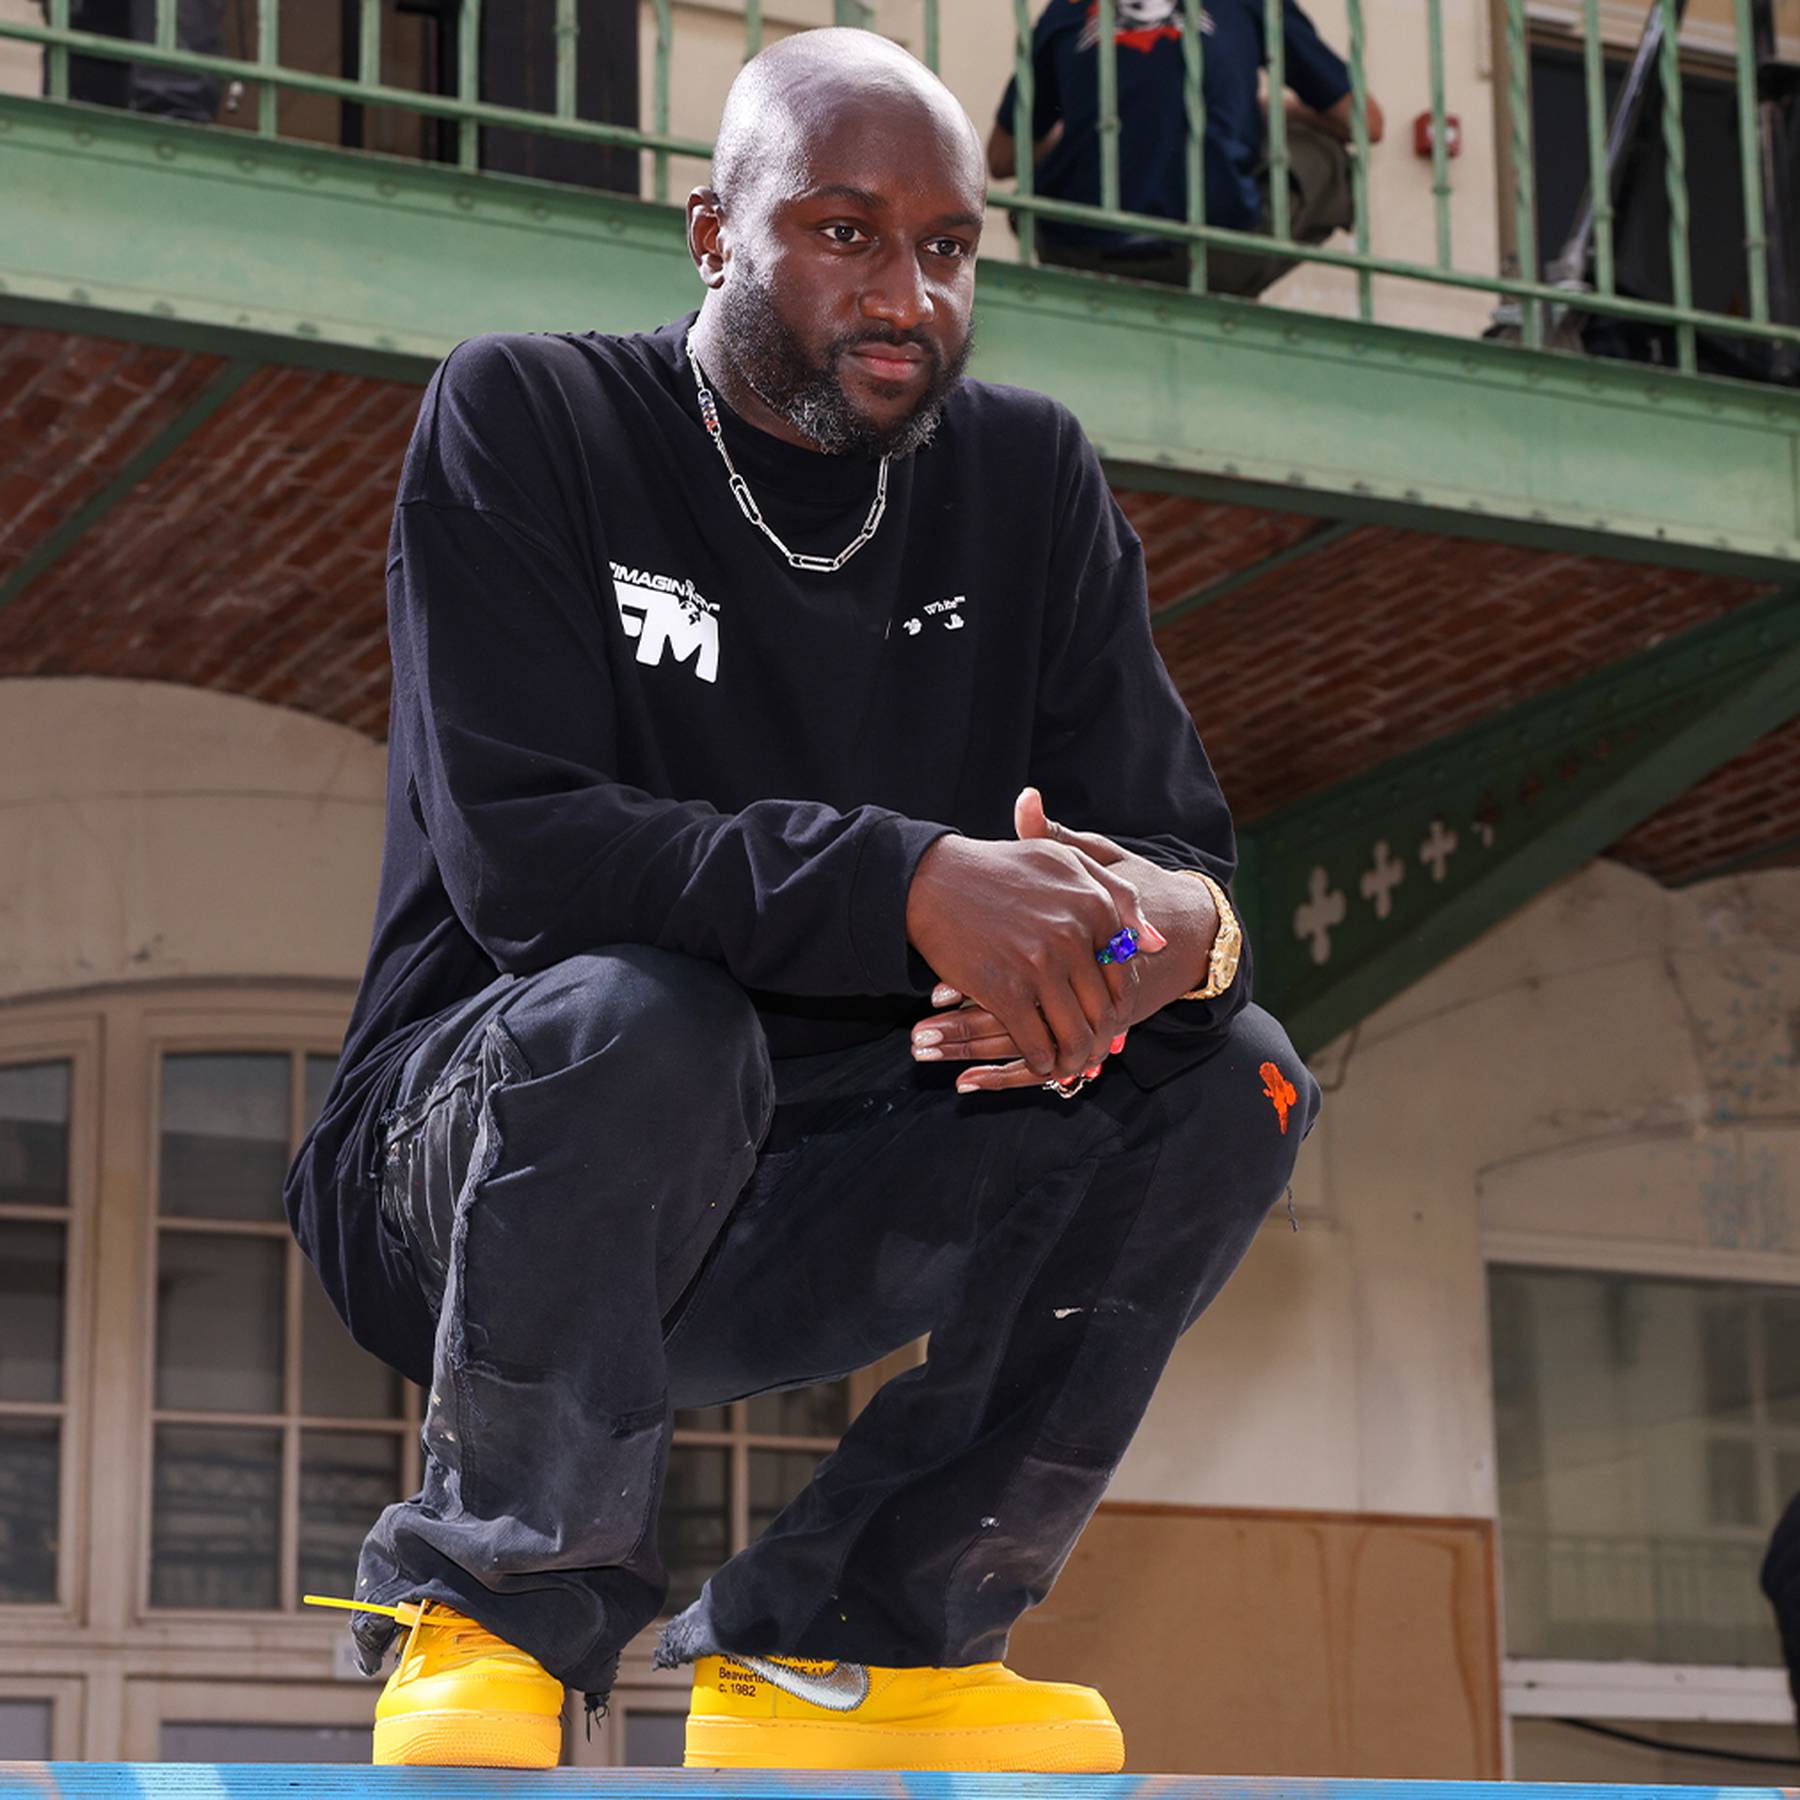 A look at Virgil Abloh's boundary-pushing designs and